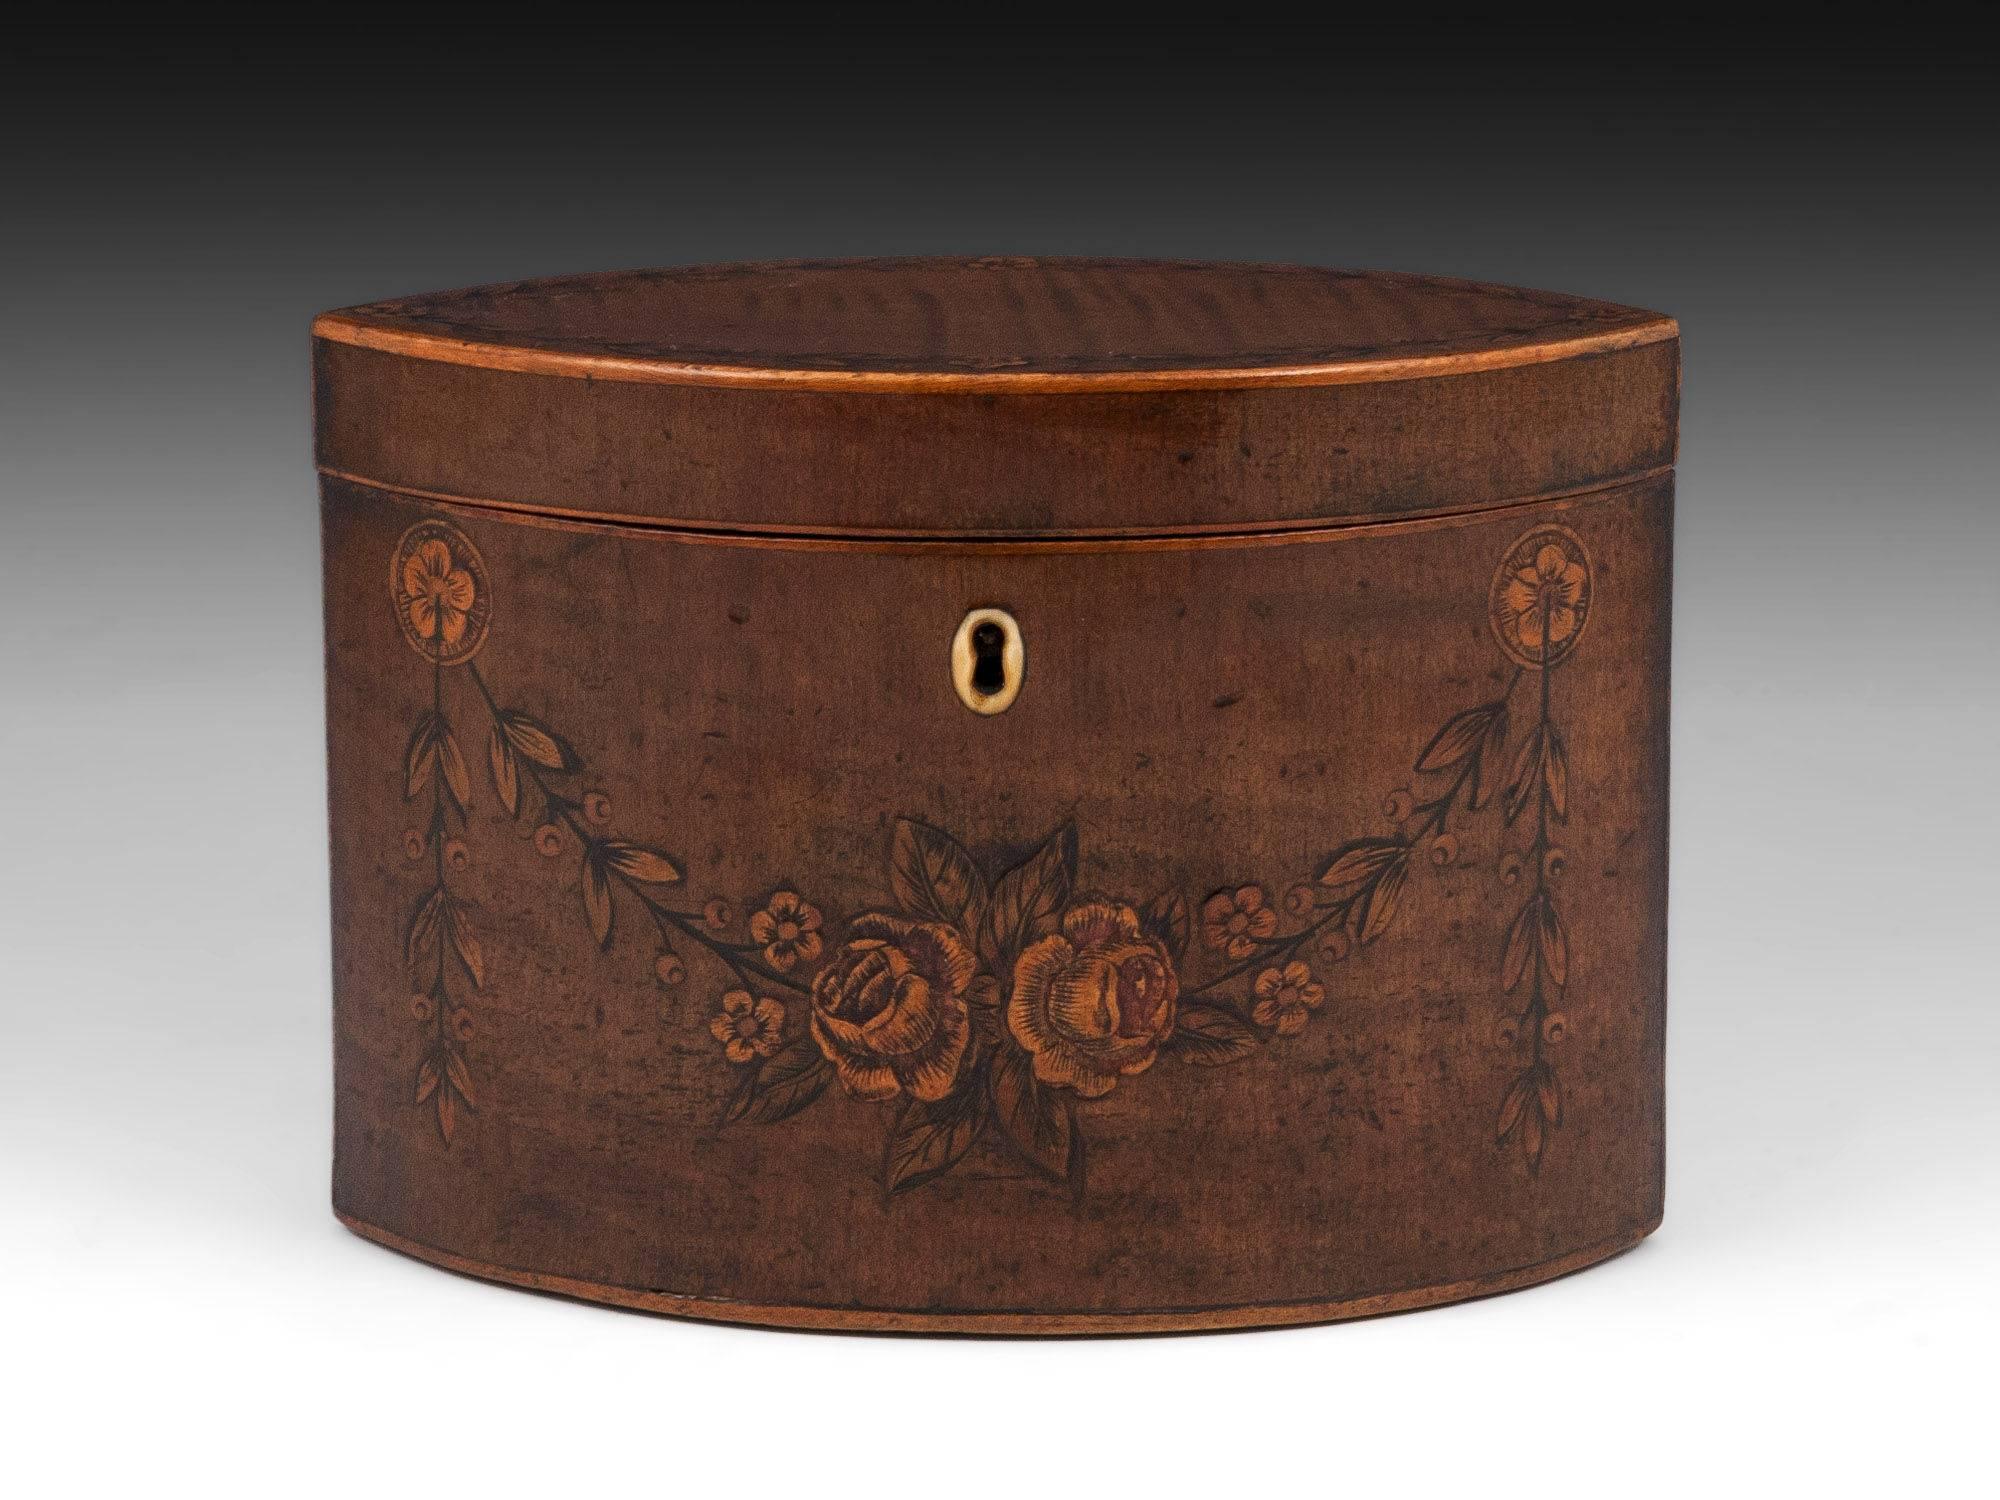 The top the lid is delicately inlaid with flower bells and opens to reveal the original zinc lining and the original lid. The front the tea caddy is exquisitely inlaid with flowers and bells.